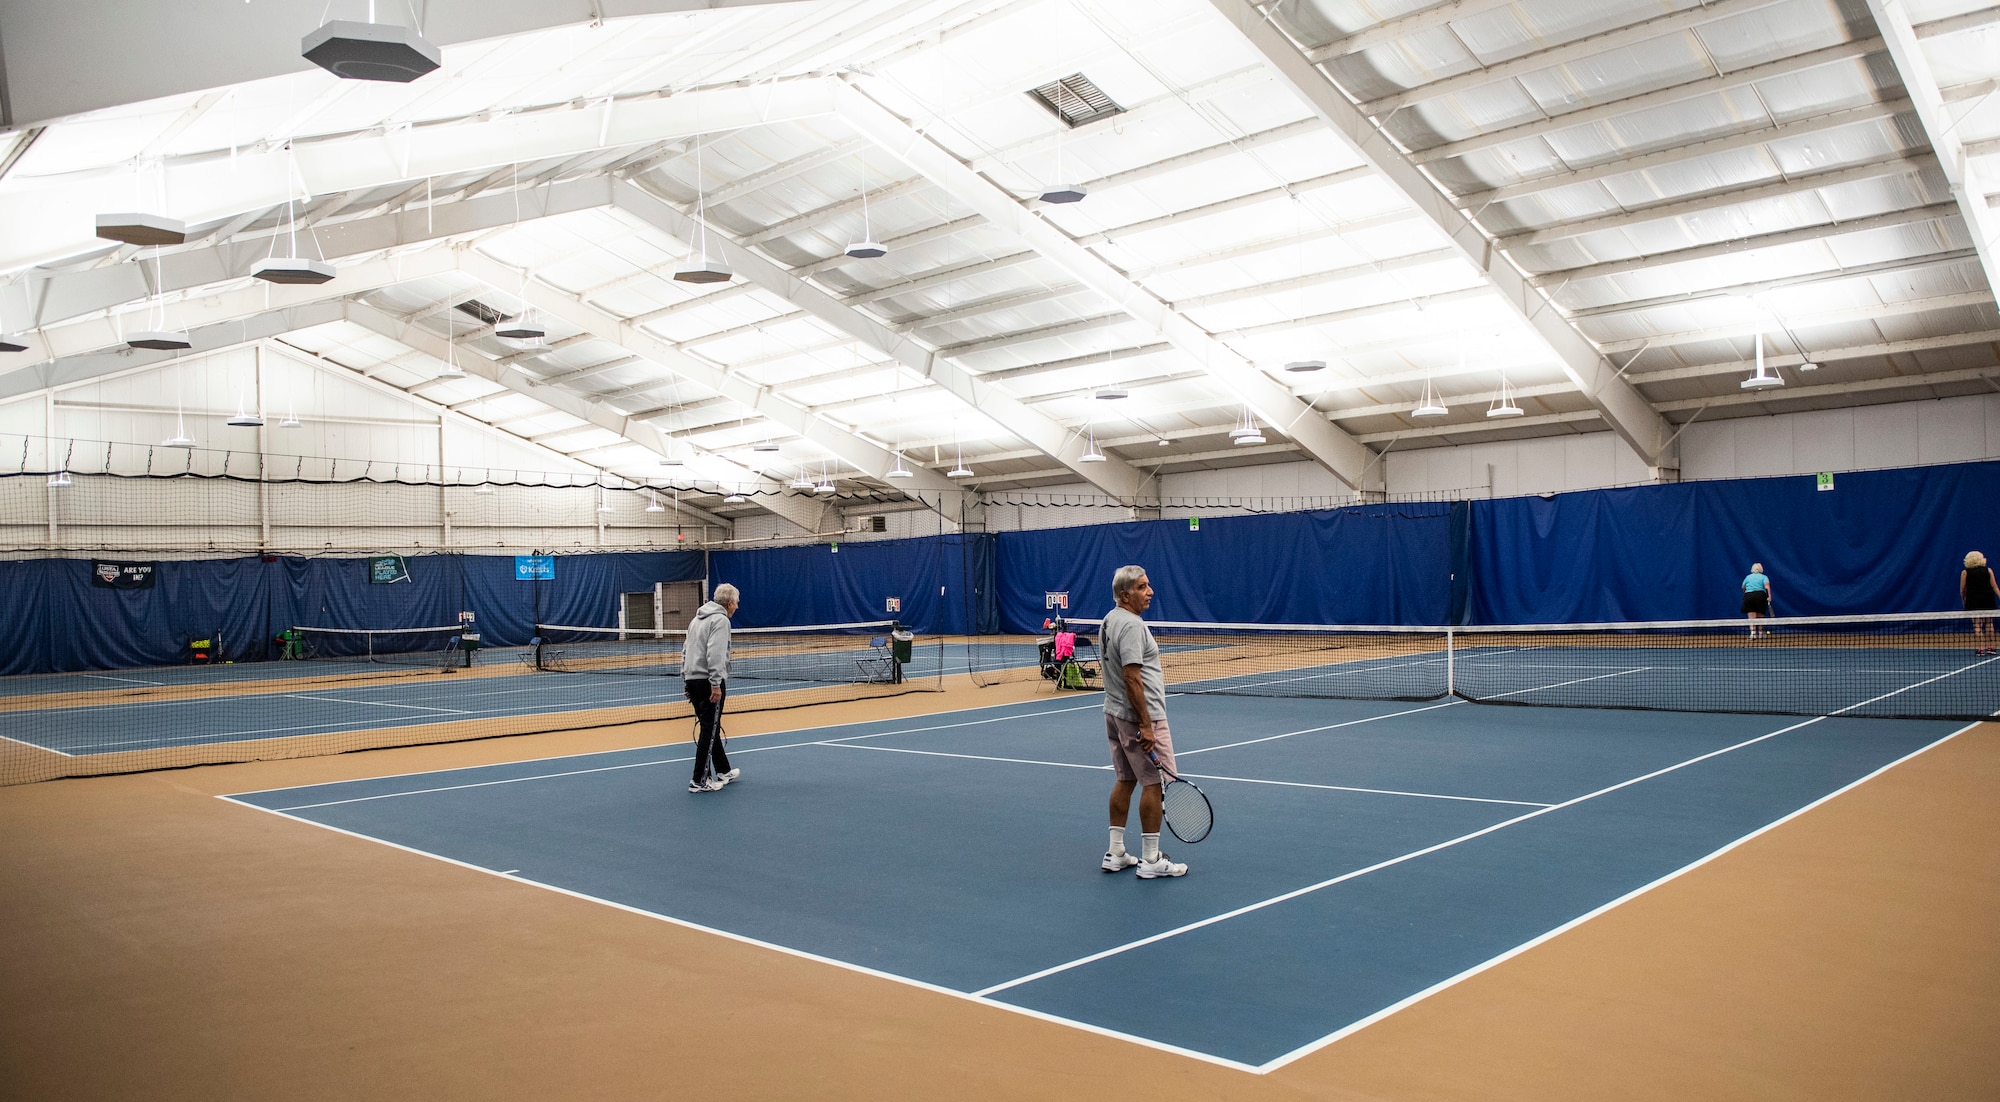 Patrons play tennis inside the base Tennis Club, Nov 1, 2021, at Wright-Patterson Air Force Base, Ohio. The club offers 4 LED lit courts to play on and several other amenities for those who need to practice. (U.S. Air Force photo by Wesley Farnsworth)